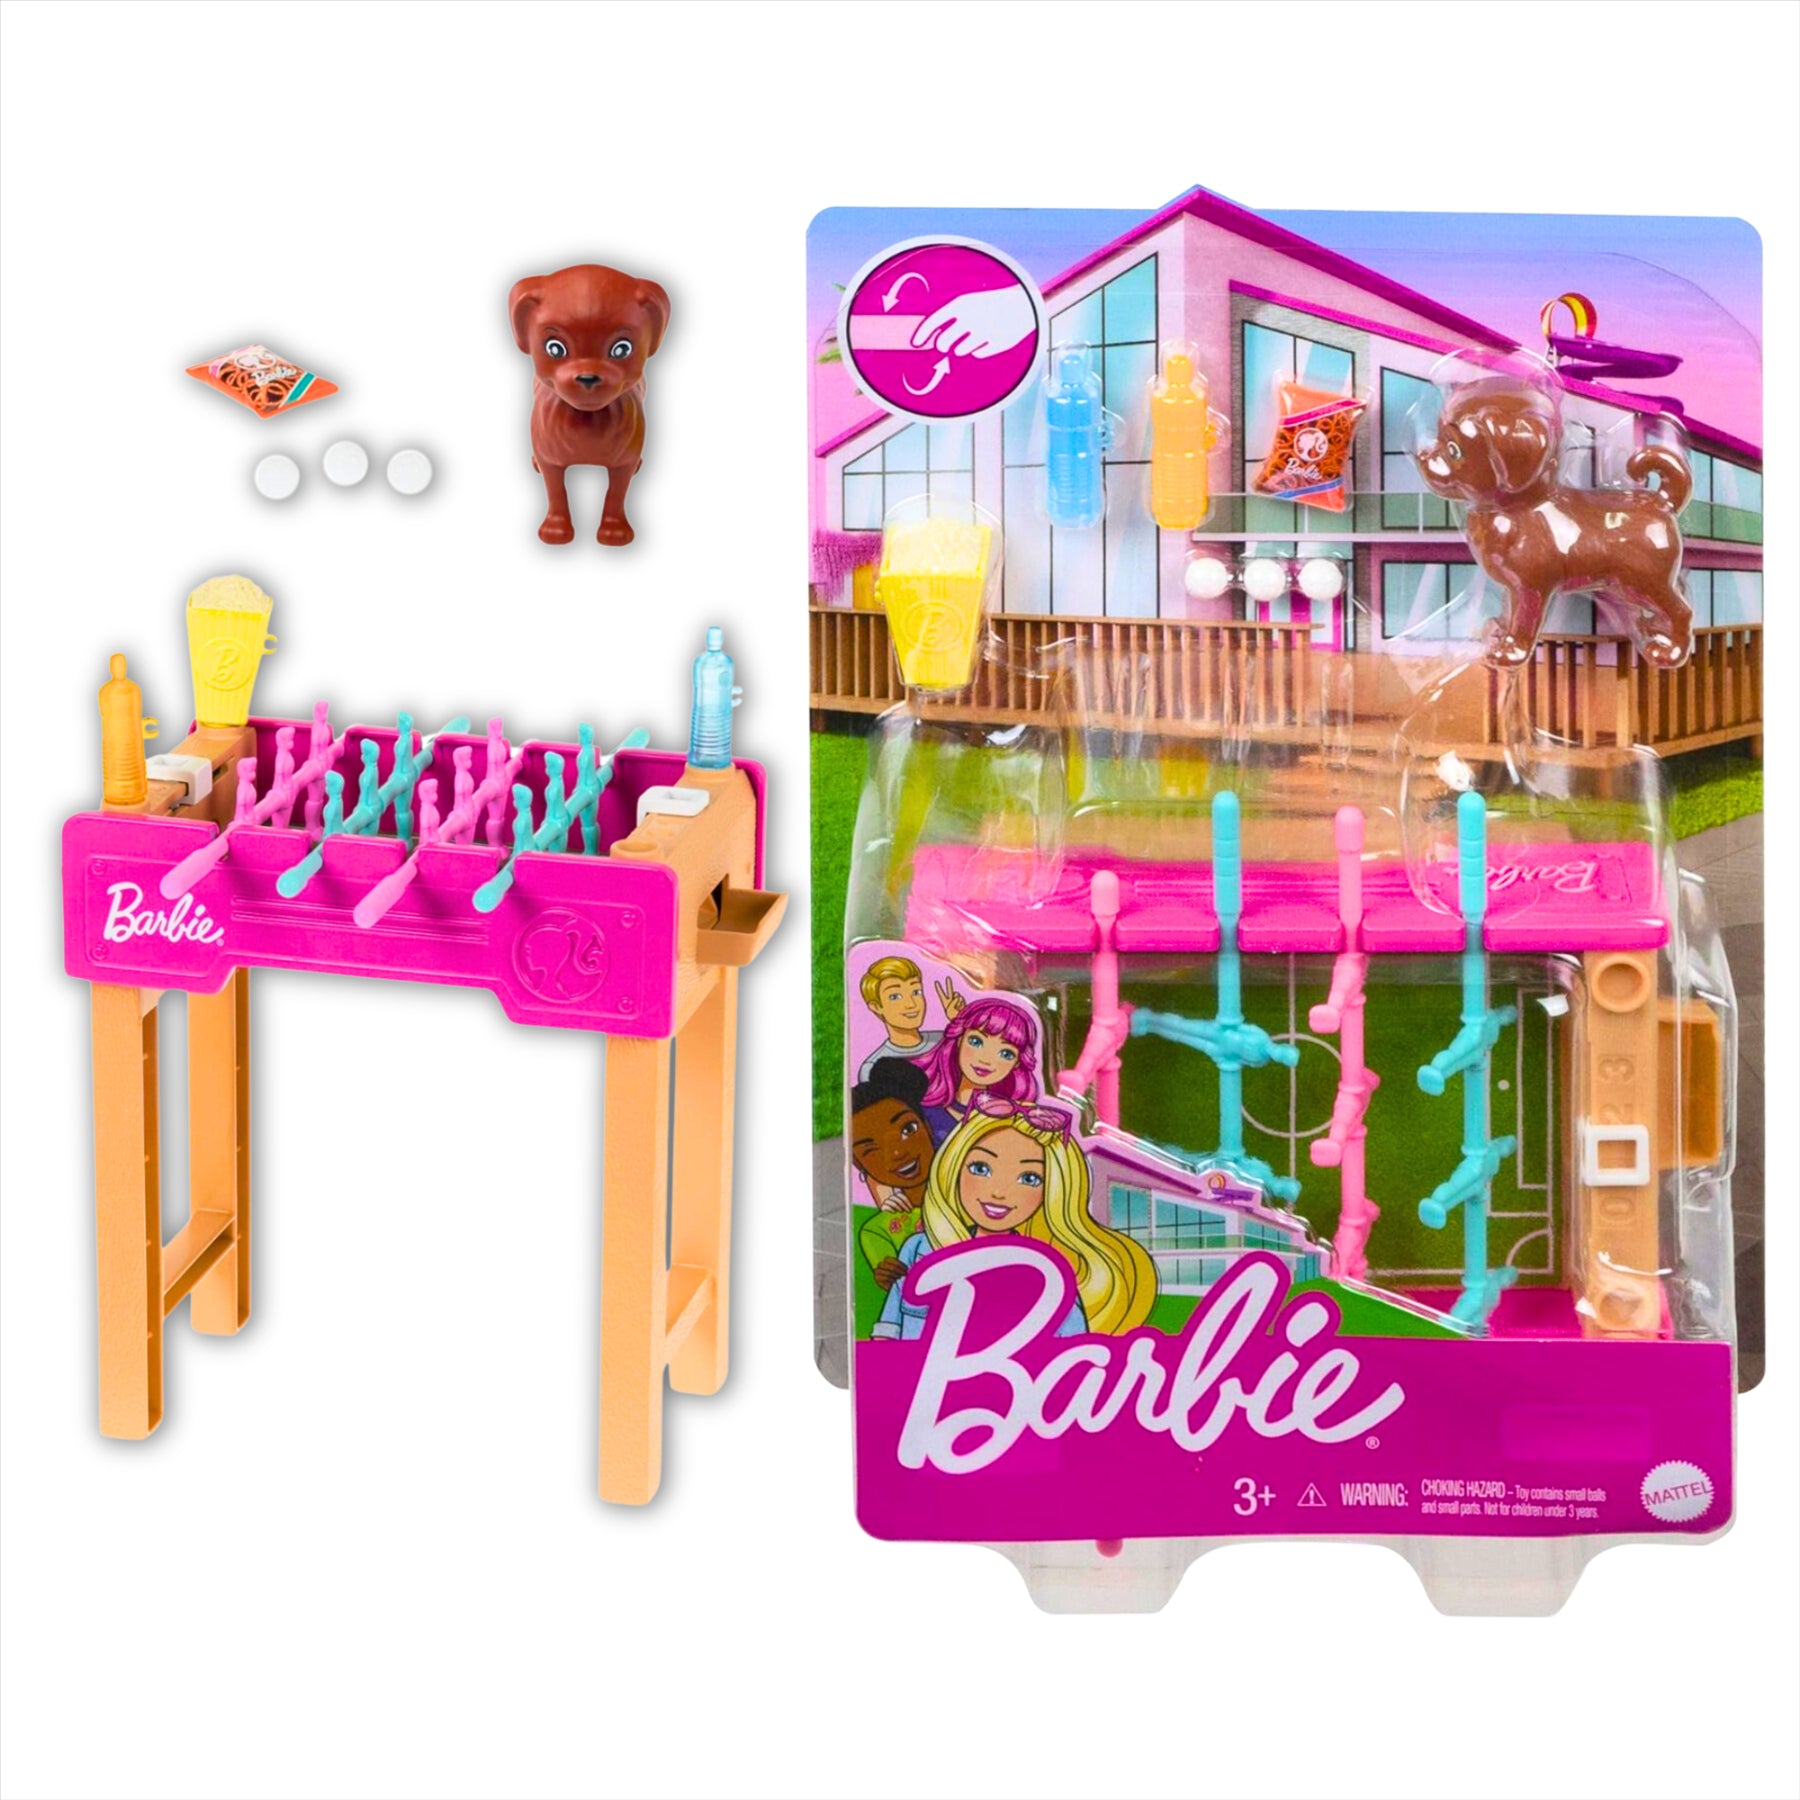 Barbie Foosball Playset with Dog and Accessories - Includes Functional Foosball Table, Dog Figure, and Snacks - Toptoys2u